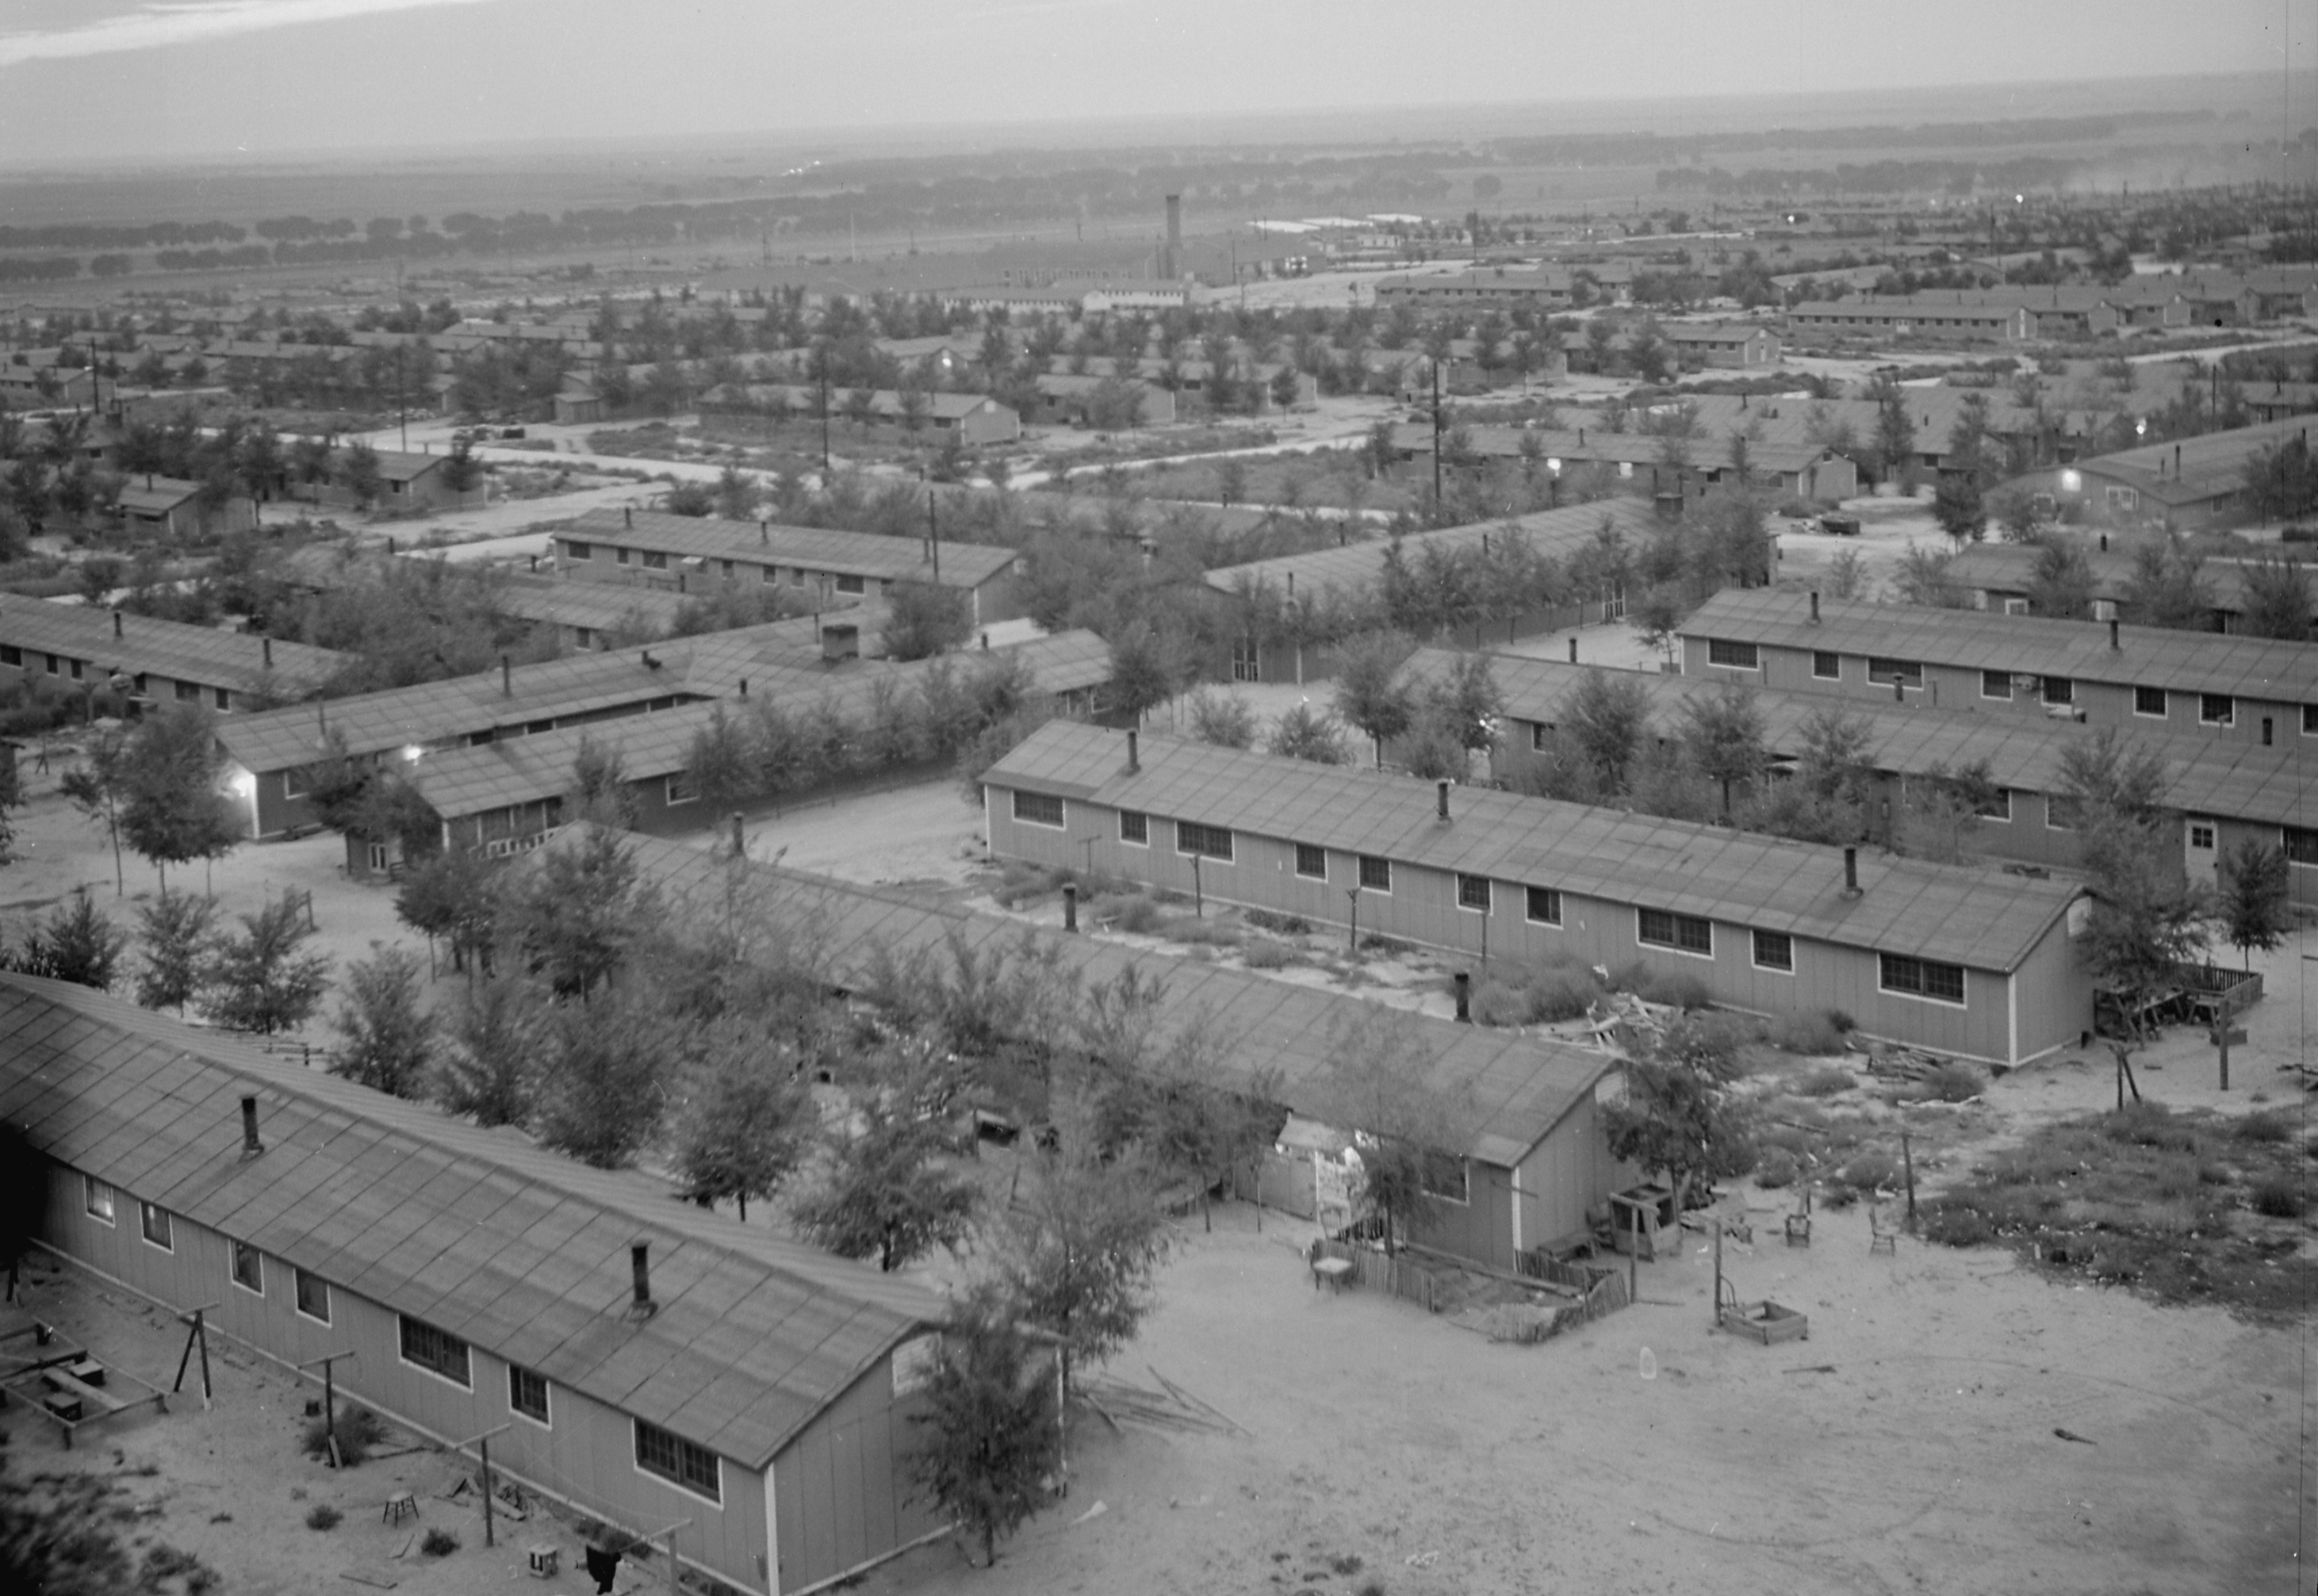 Aerial view of Amache, 1940s